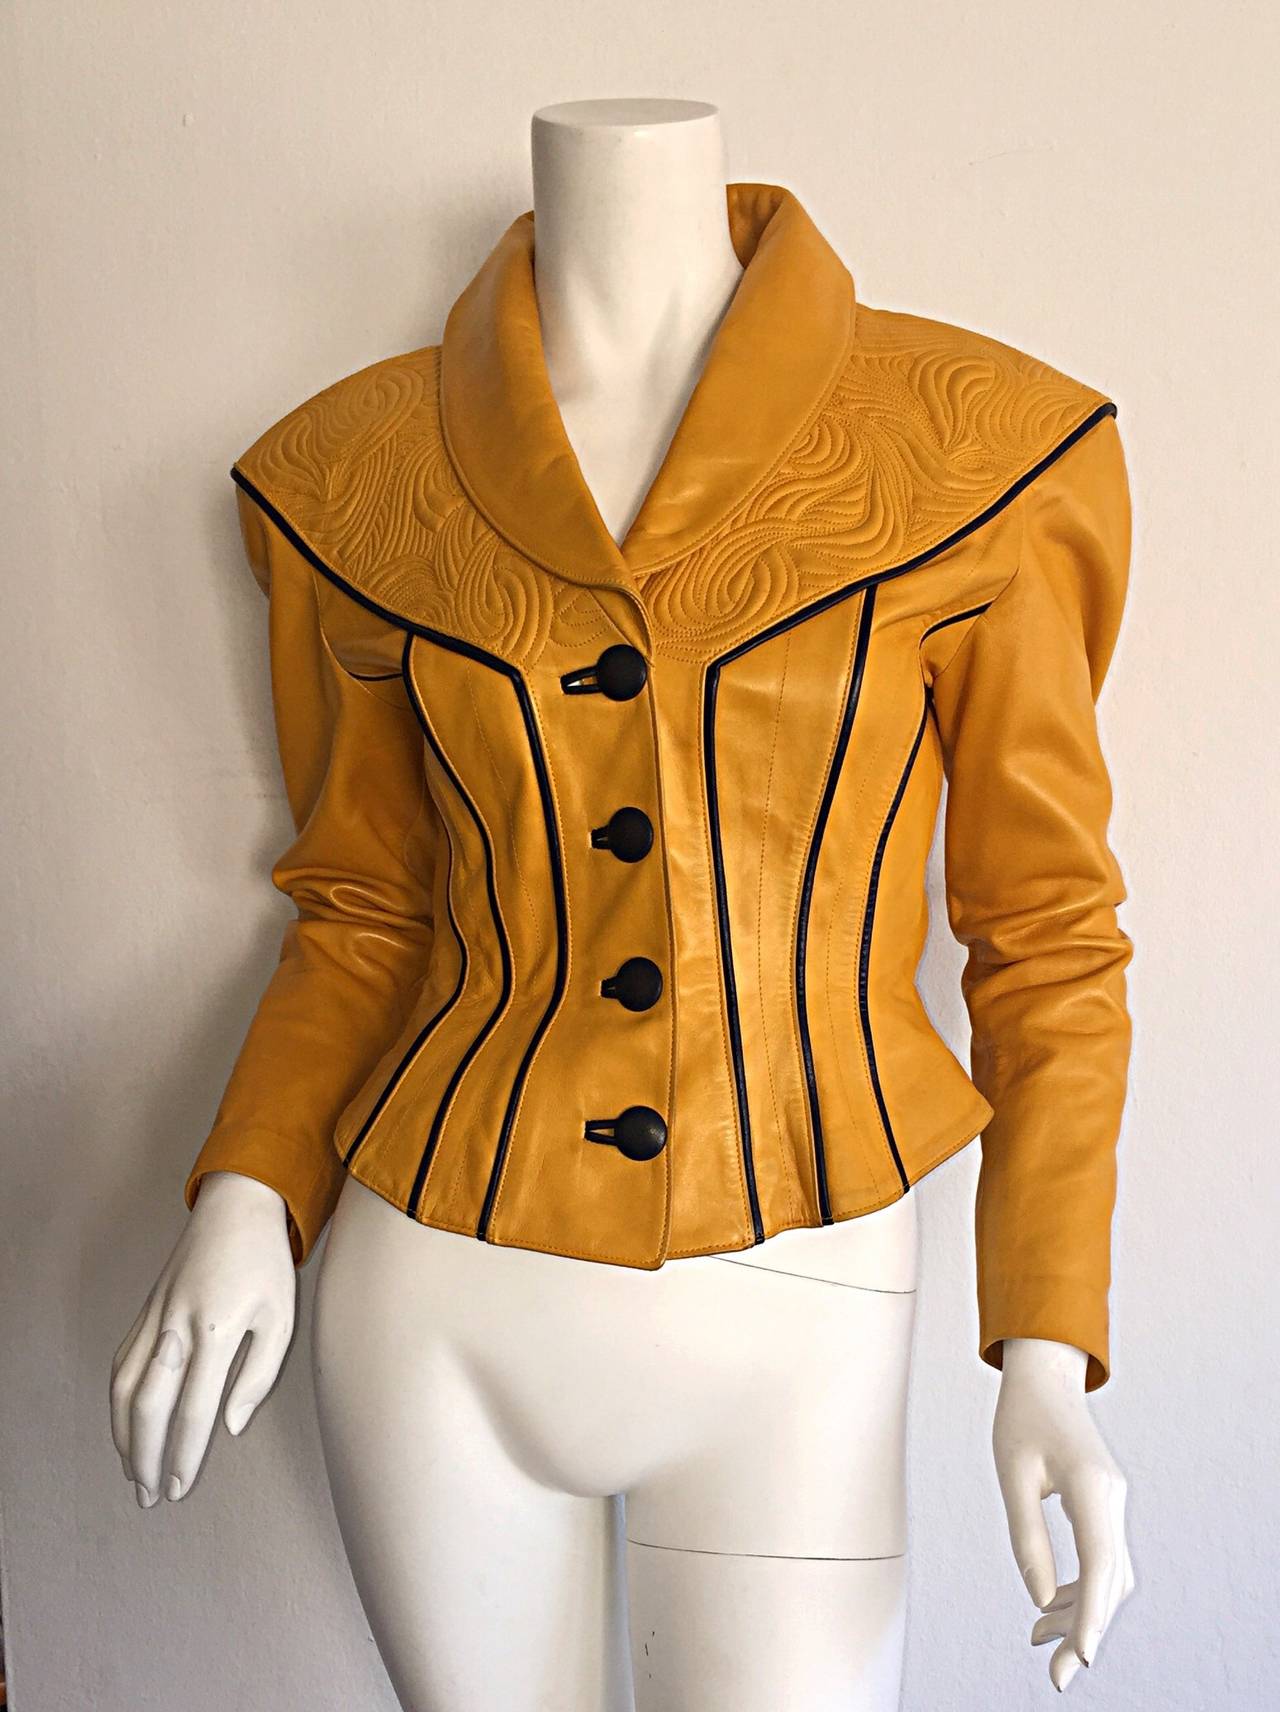 Rare vintage Jitrois yellow leather jacket! Wonderful amounts of handcrafted detail to this beautiful jacket! Mustard yellow color, with embroidery at front shoulders, and top back. Contrasting black leather cords, and black leather buttons. Super